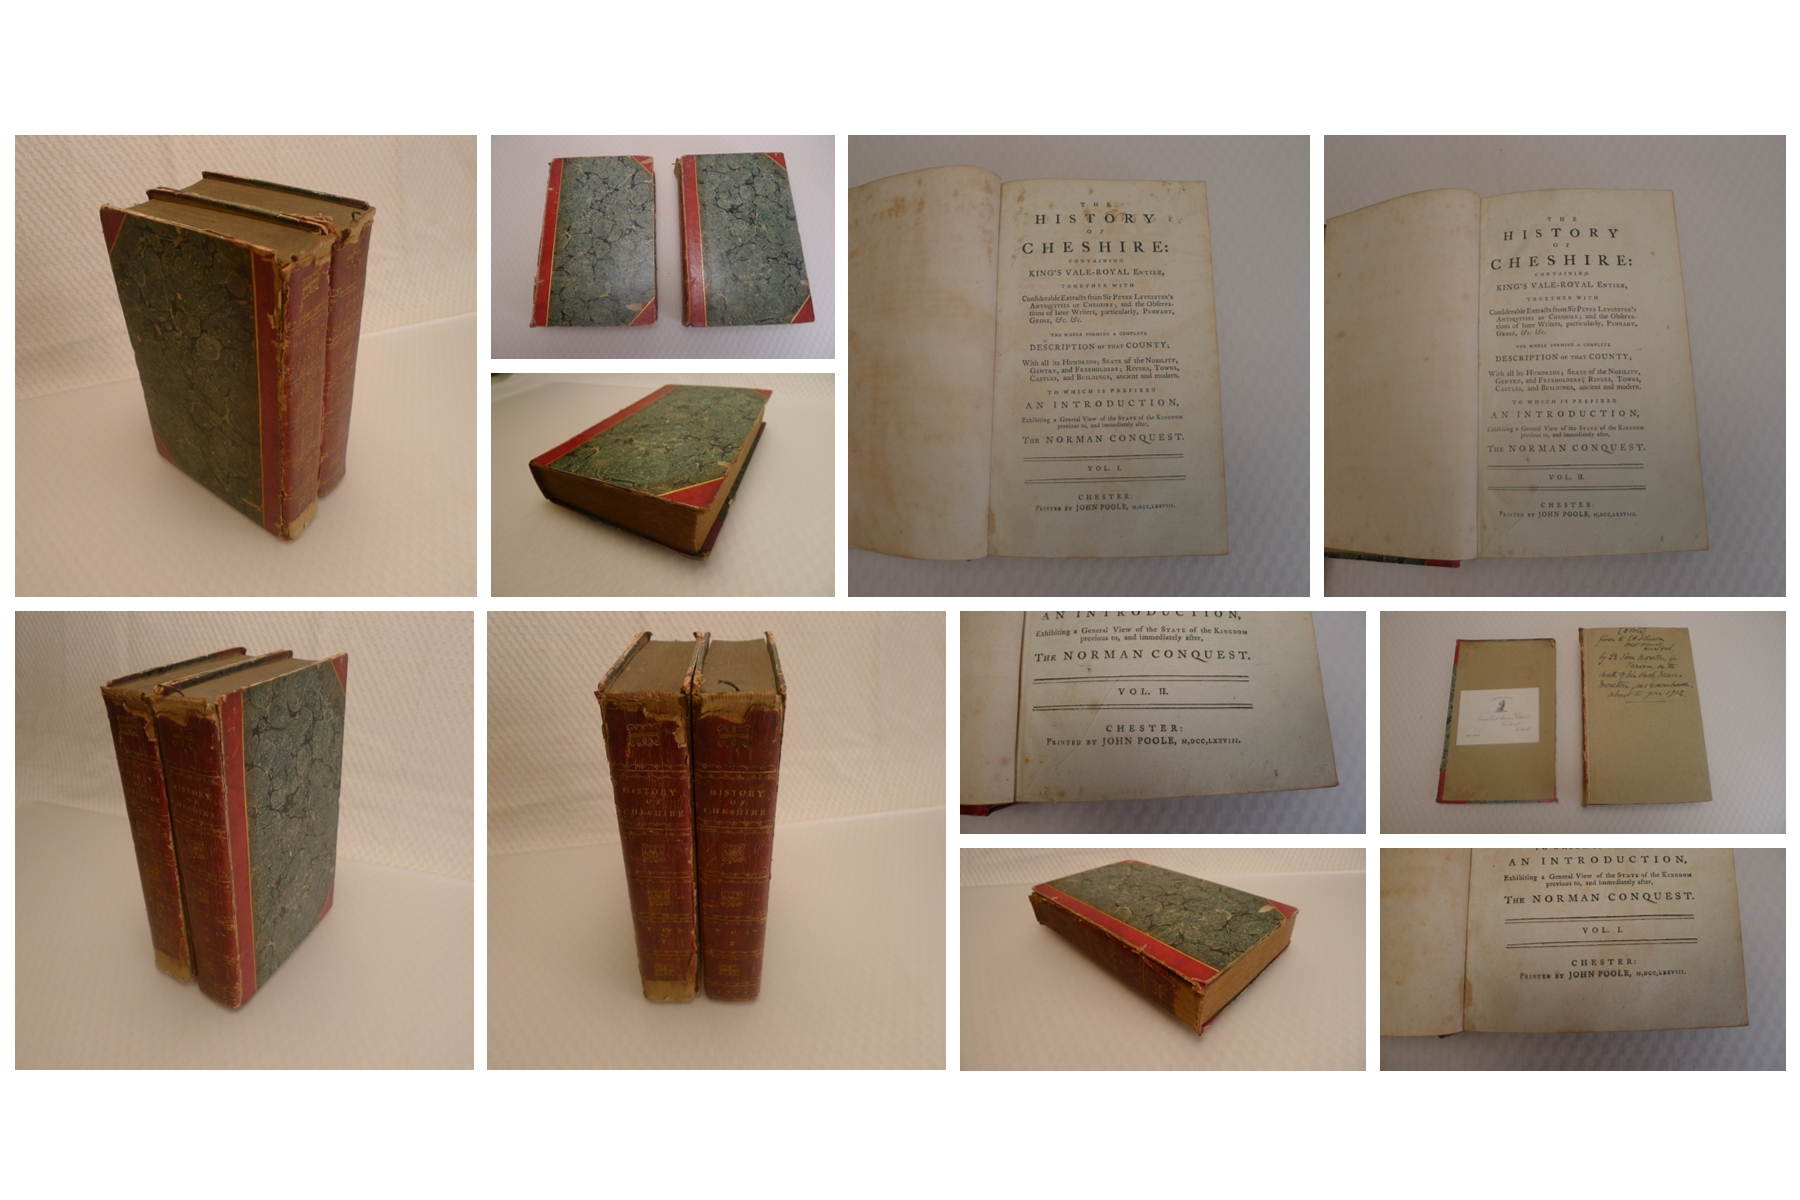 The History of Cheshire published by John Poole, Chester in 1778, two volume set. The full title